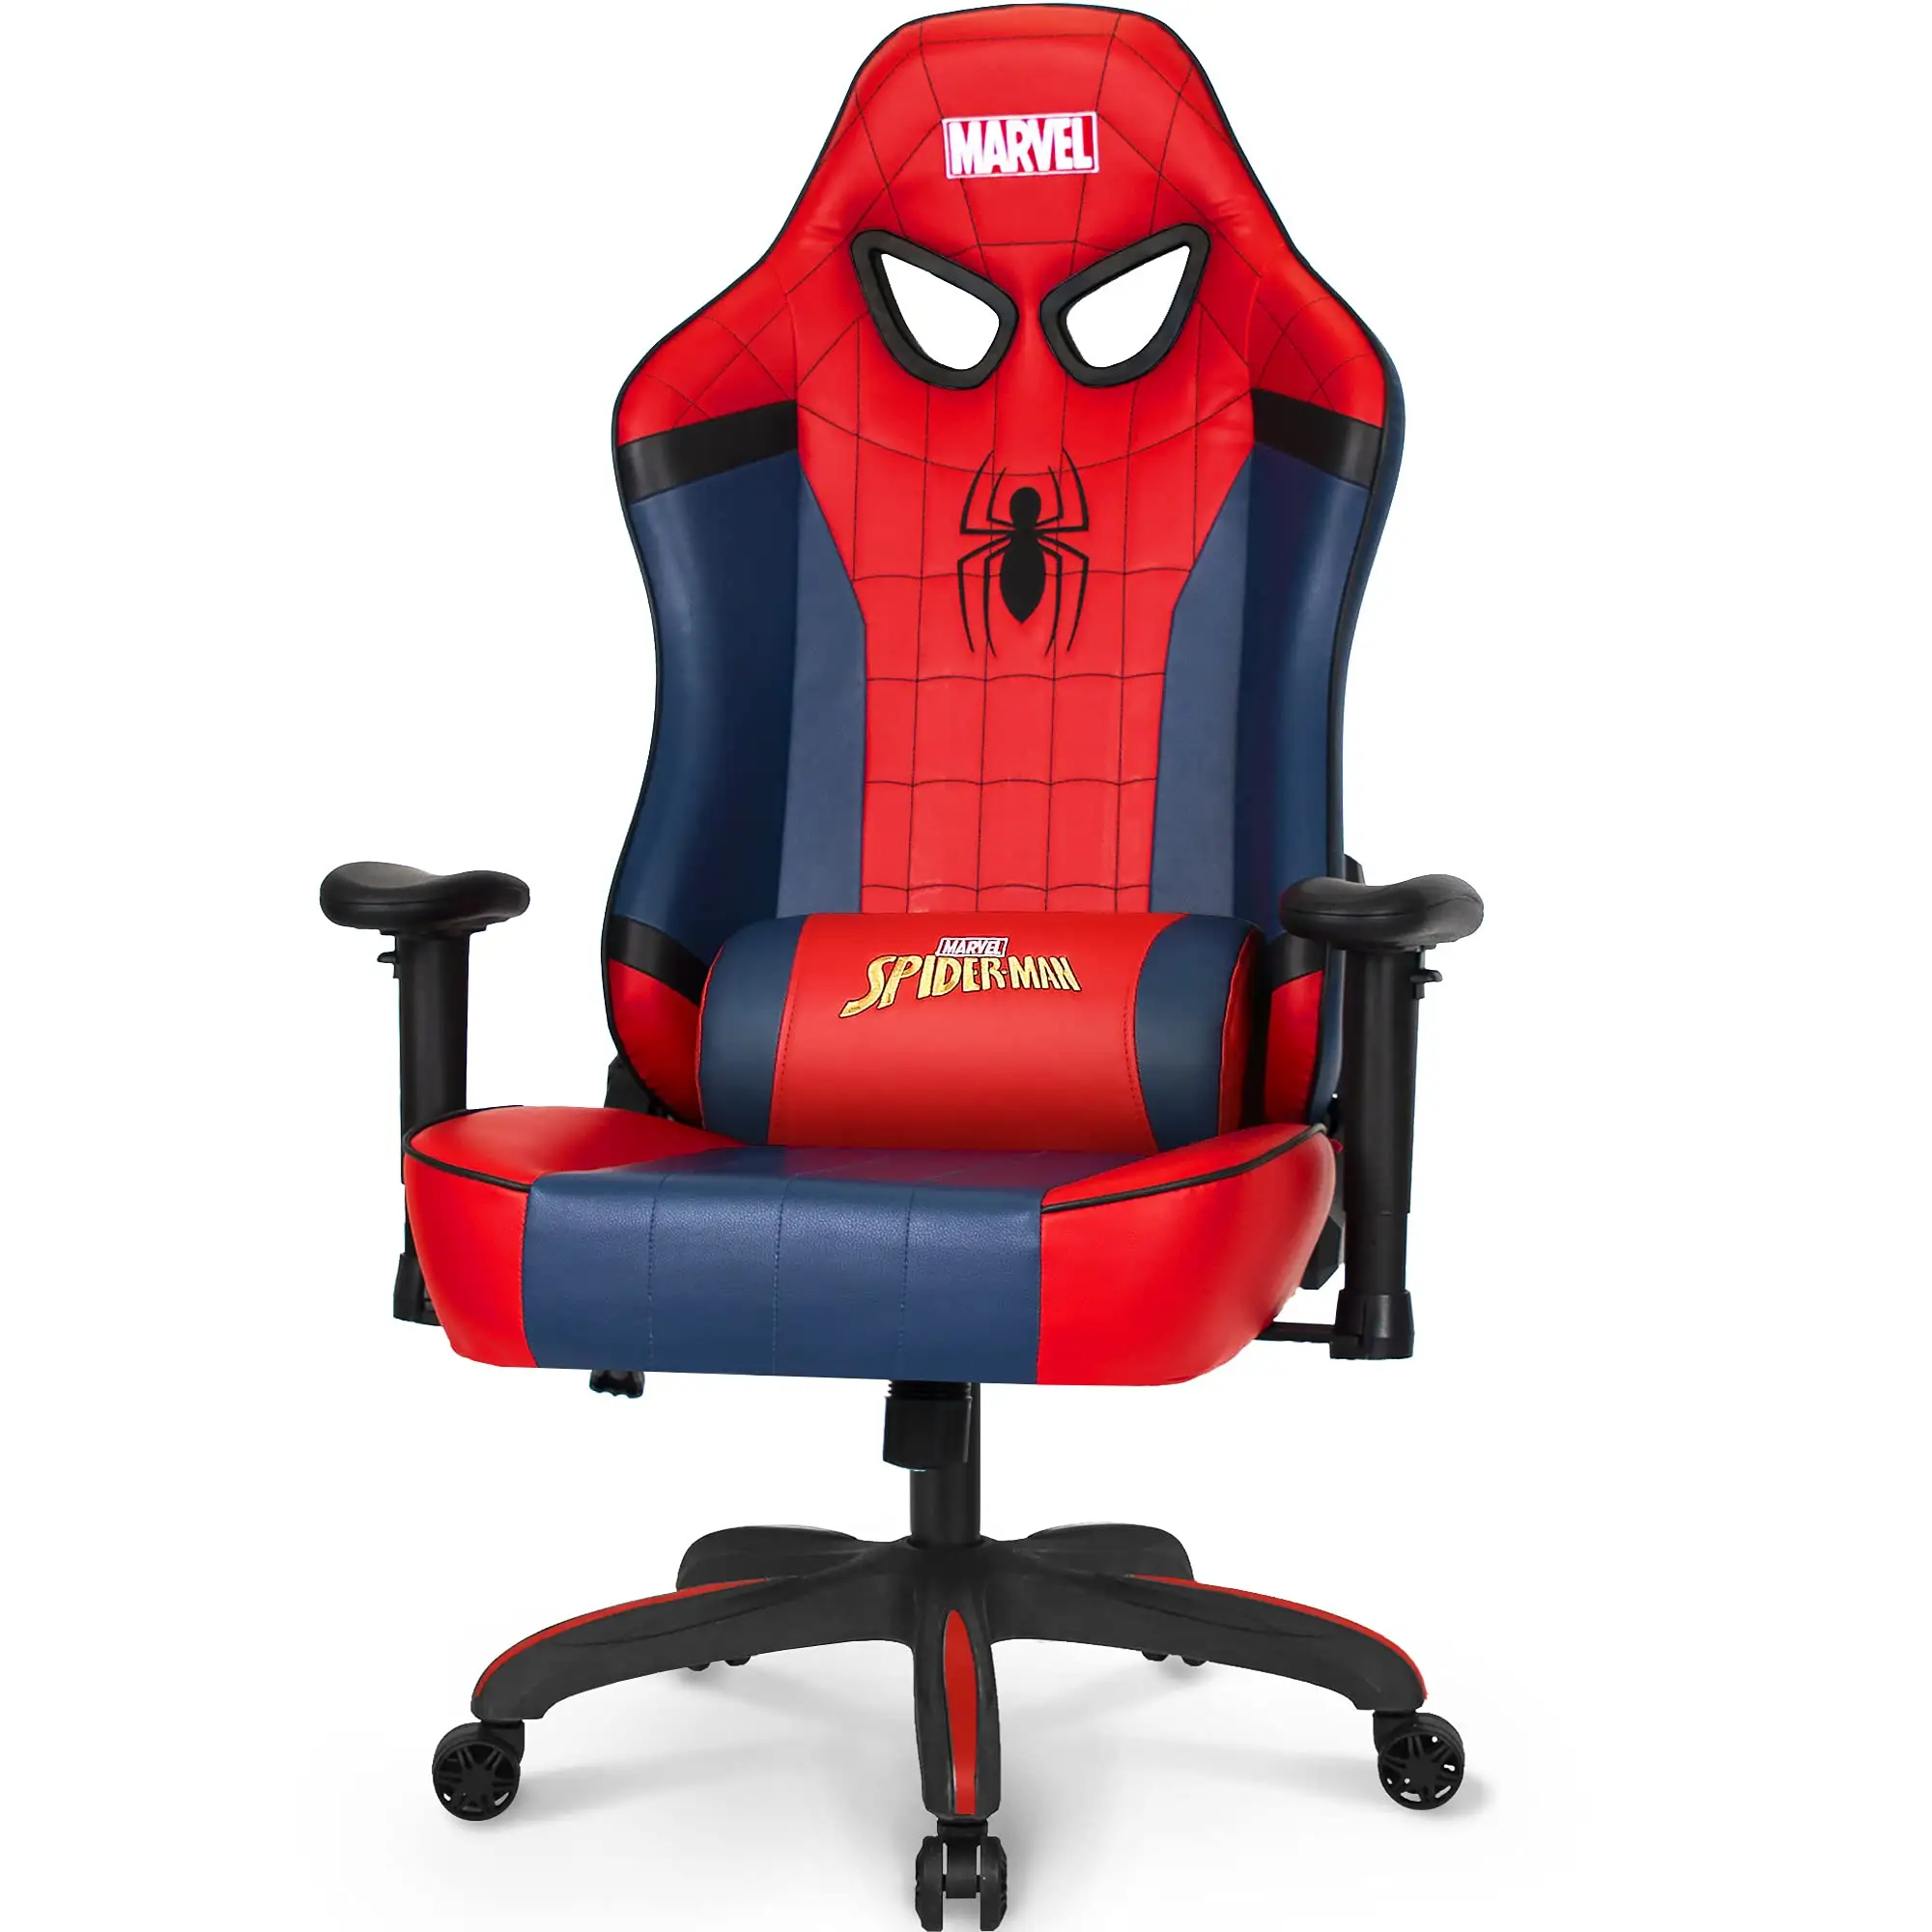 Spider Man pc Marvel Avengers gaming chair breathable Gaming Chair pvc leather High density foam silla gamer Malaysia boss chair